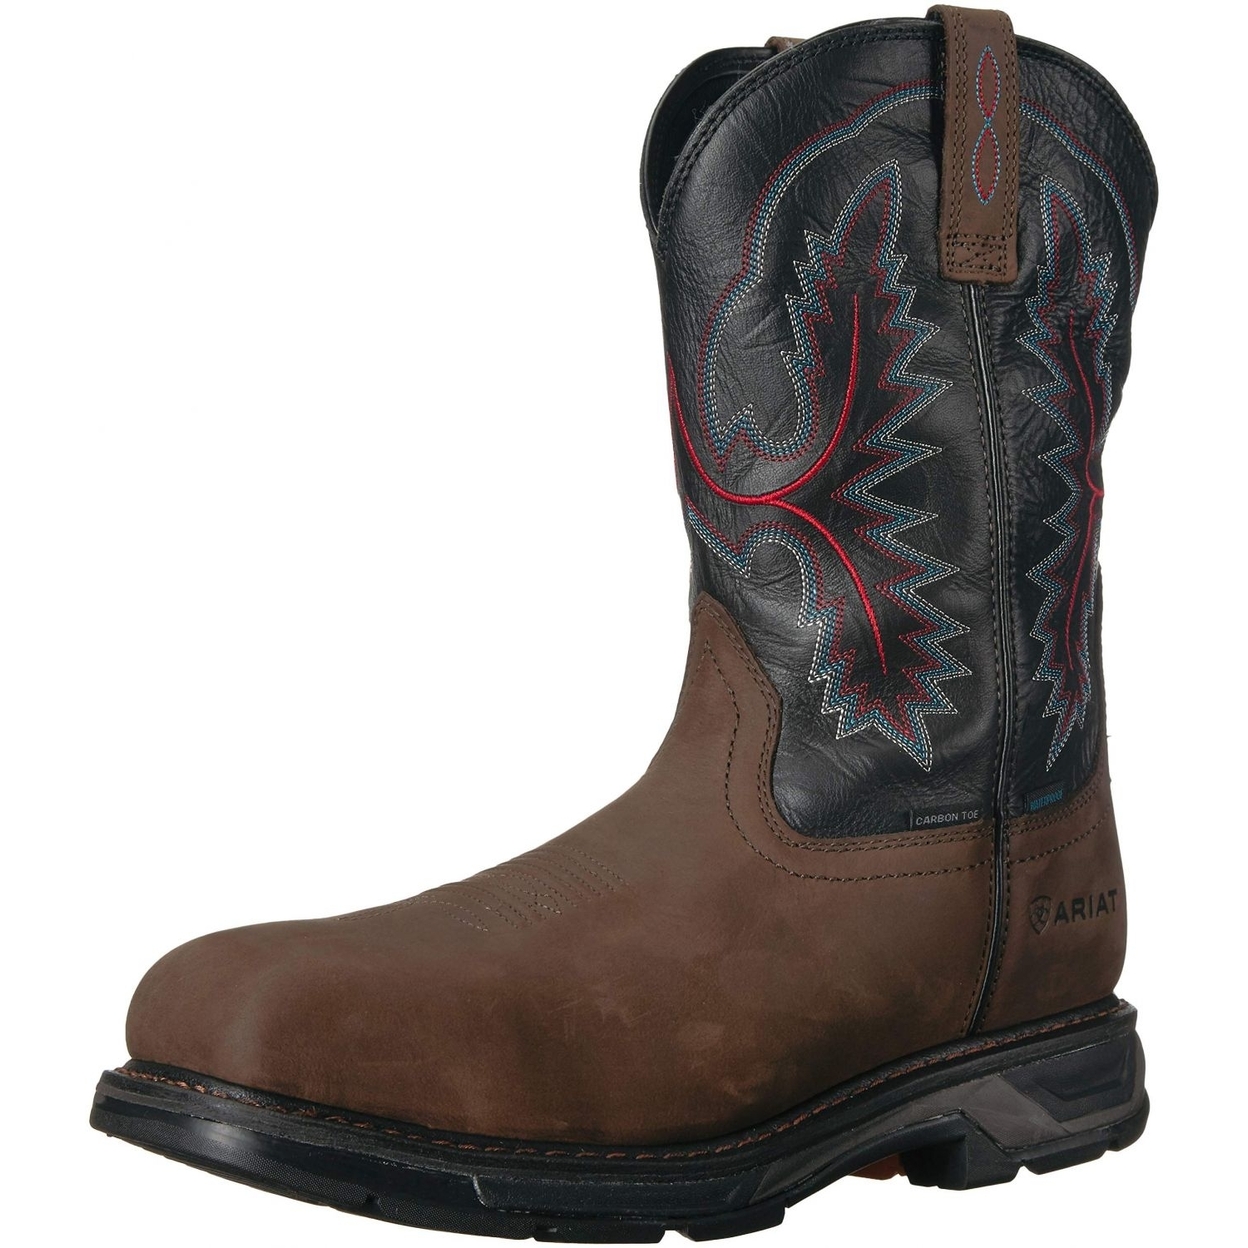 Ariat Work Men's Workhog XT H2O Carbon Toe Western Boot ONE SIZE BRK/ FOREST - BRK/ FOREST, 10.5-2E